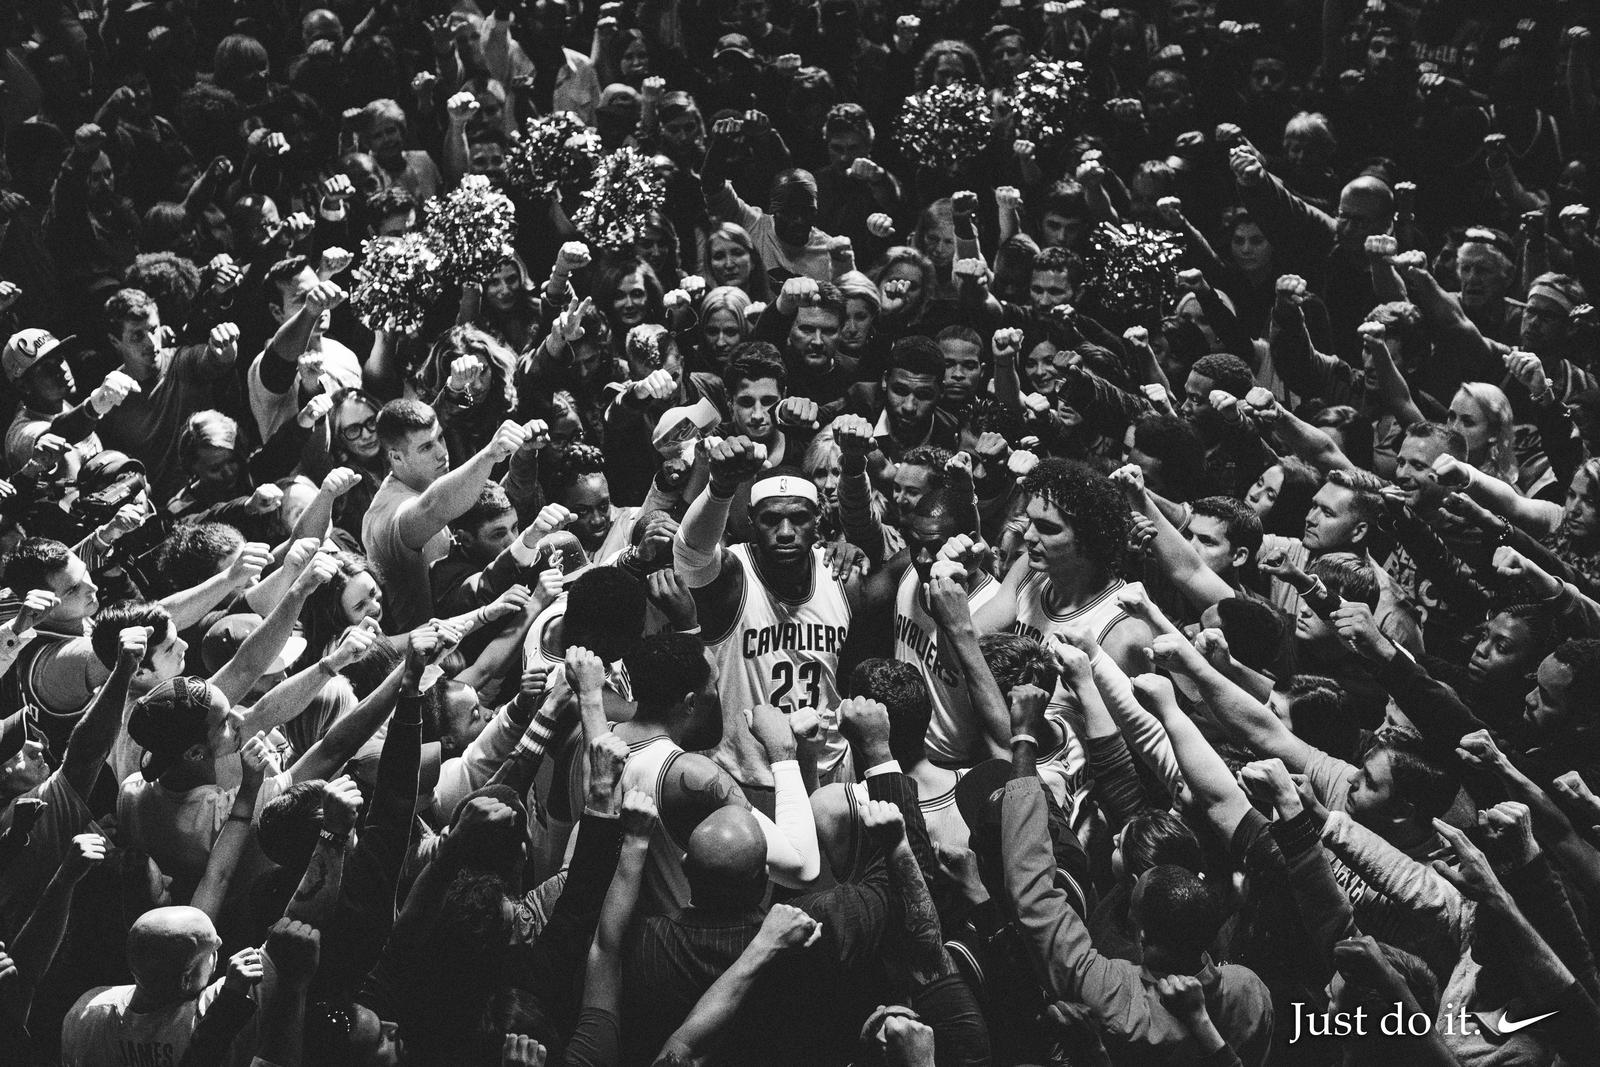 lebron james Nike commercial together cleveland cavaliers